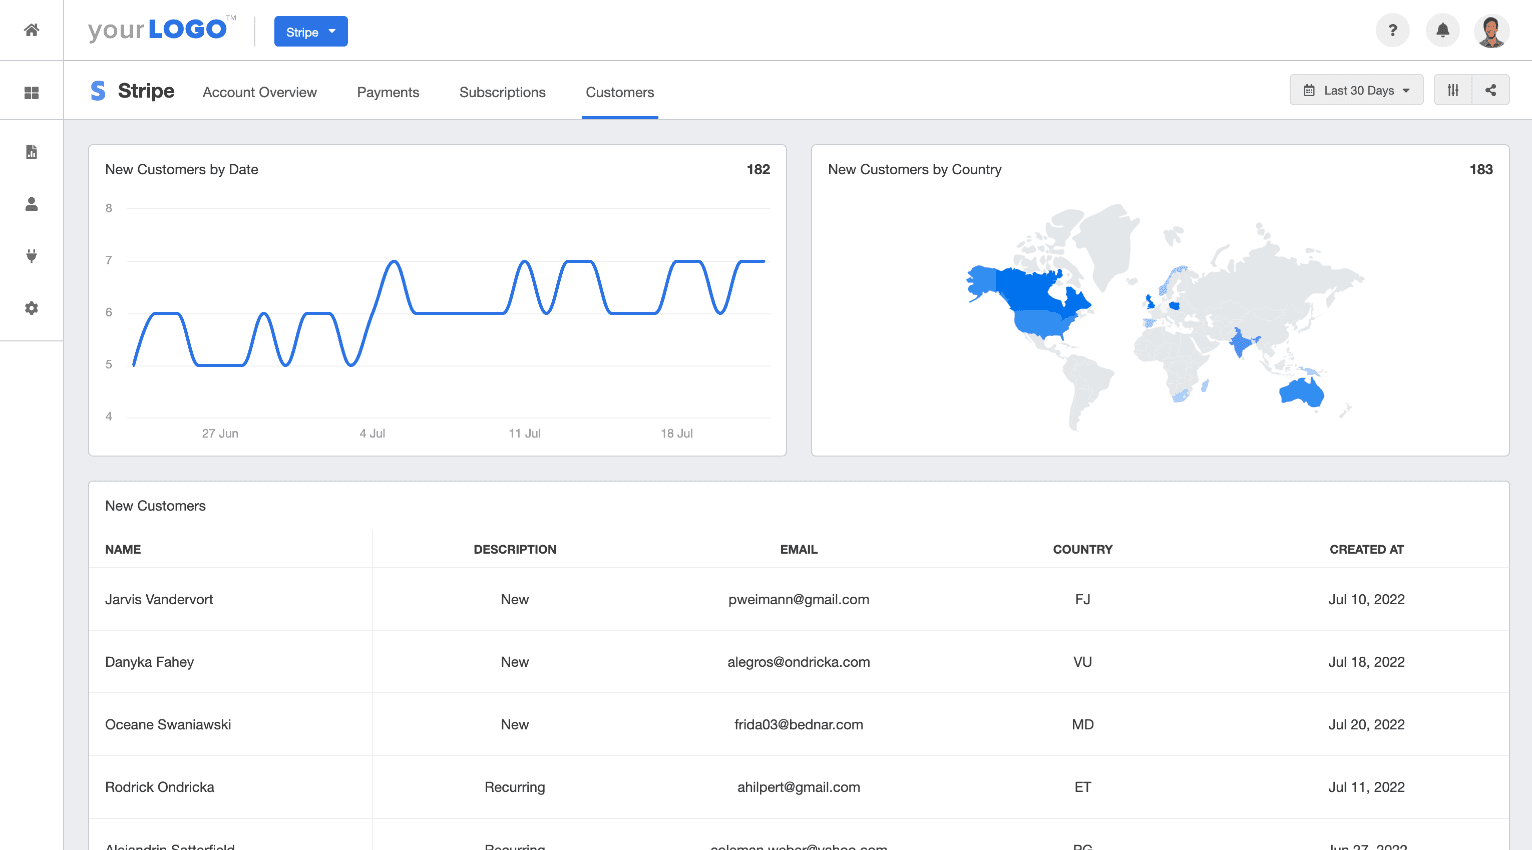 Stripe Marketing Dashboard showing the Customers Tab with demographics by country breakdown